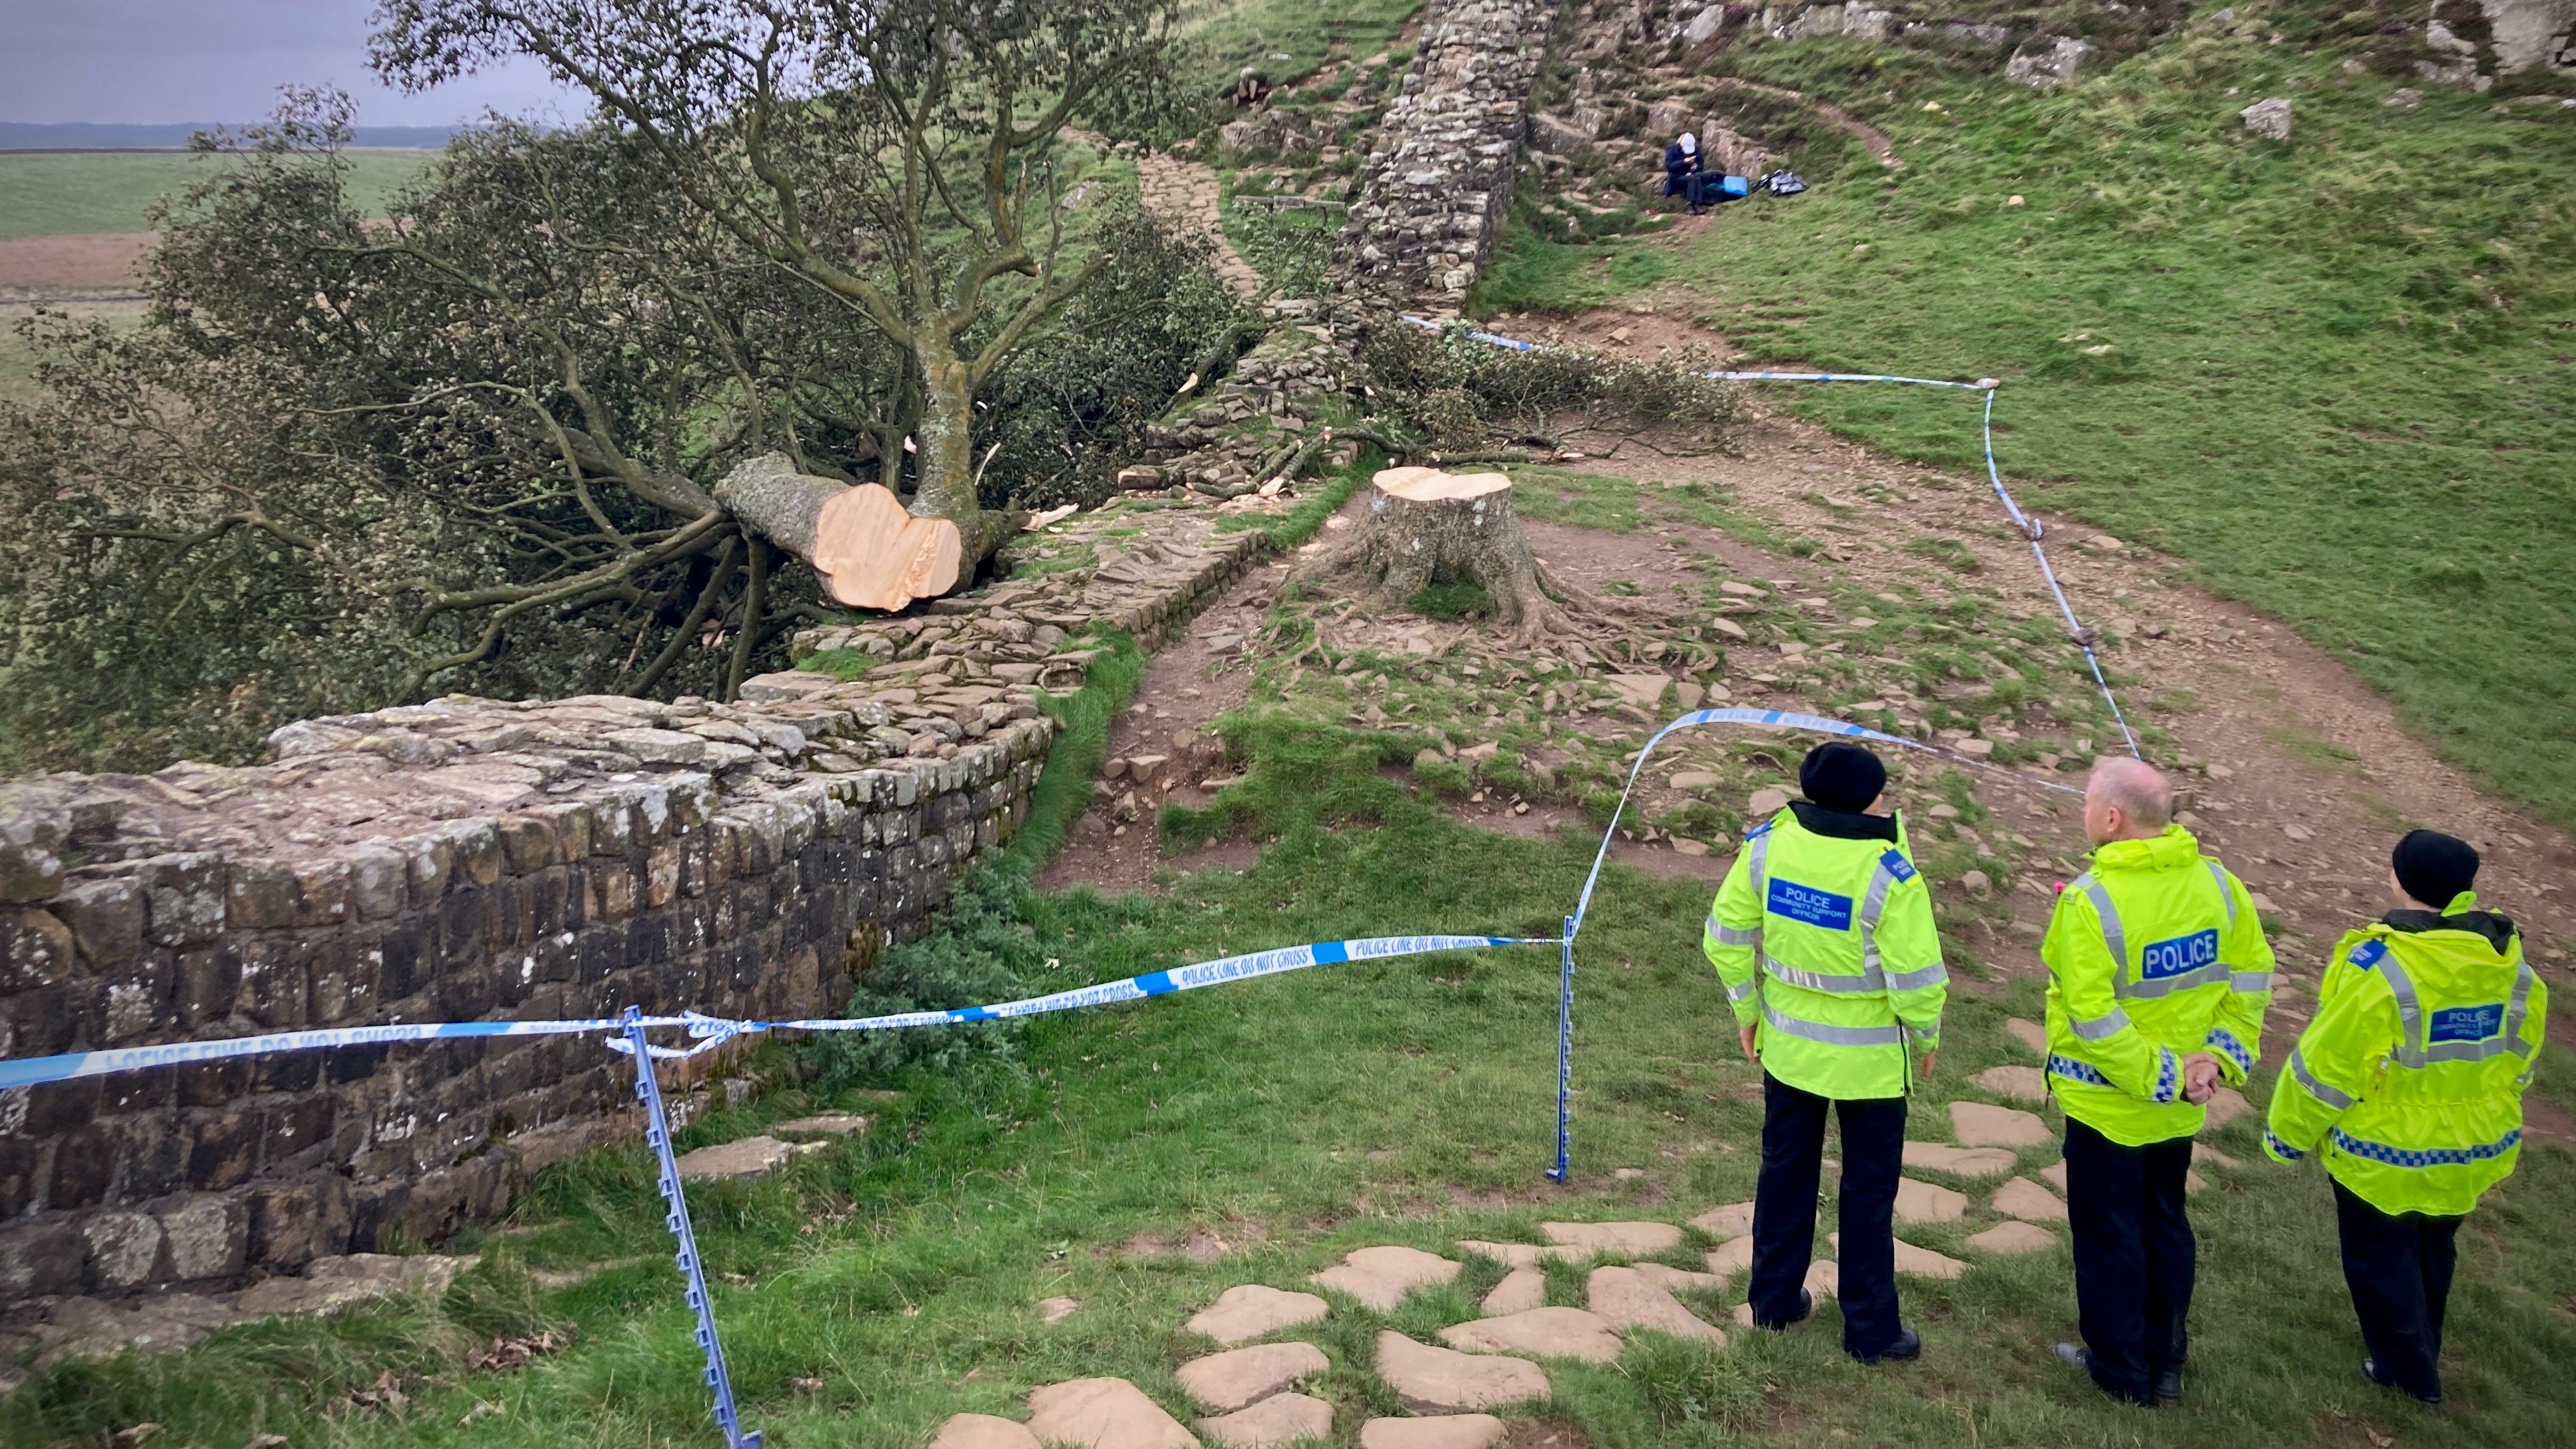 Sycamore Gap: Man in 60s bailed over felling of tree | ITV News